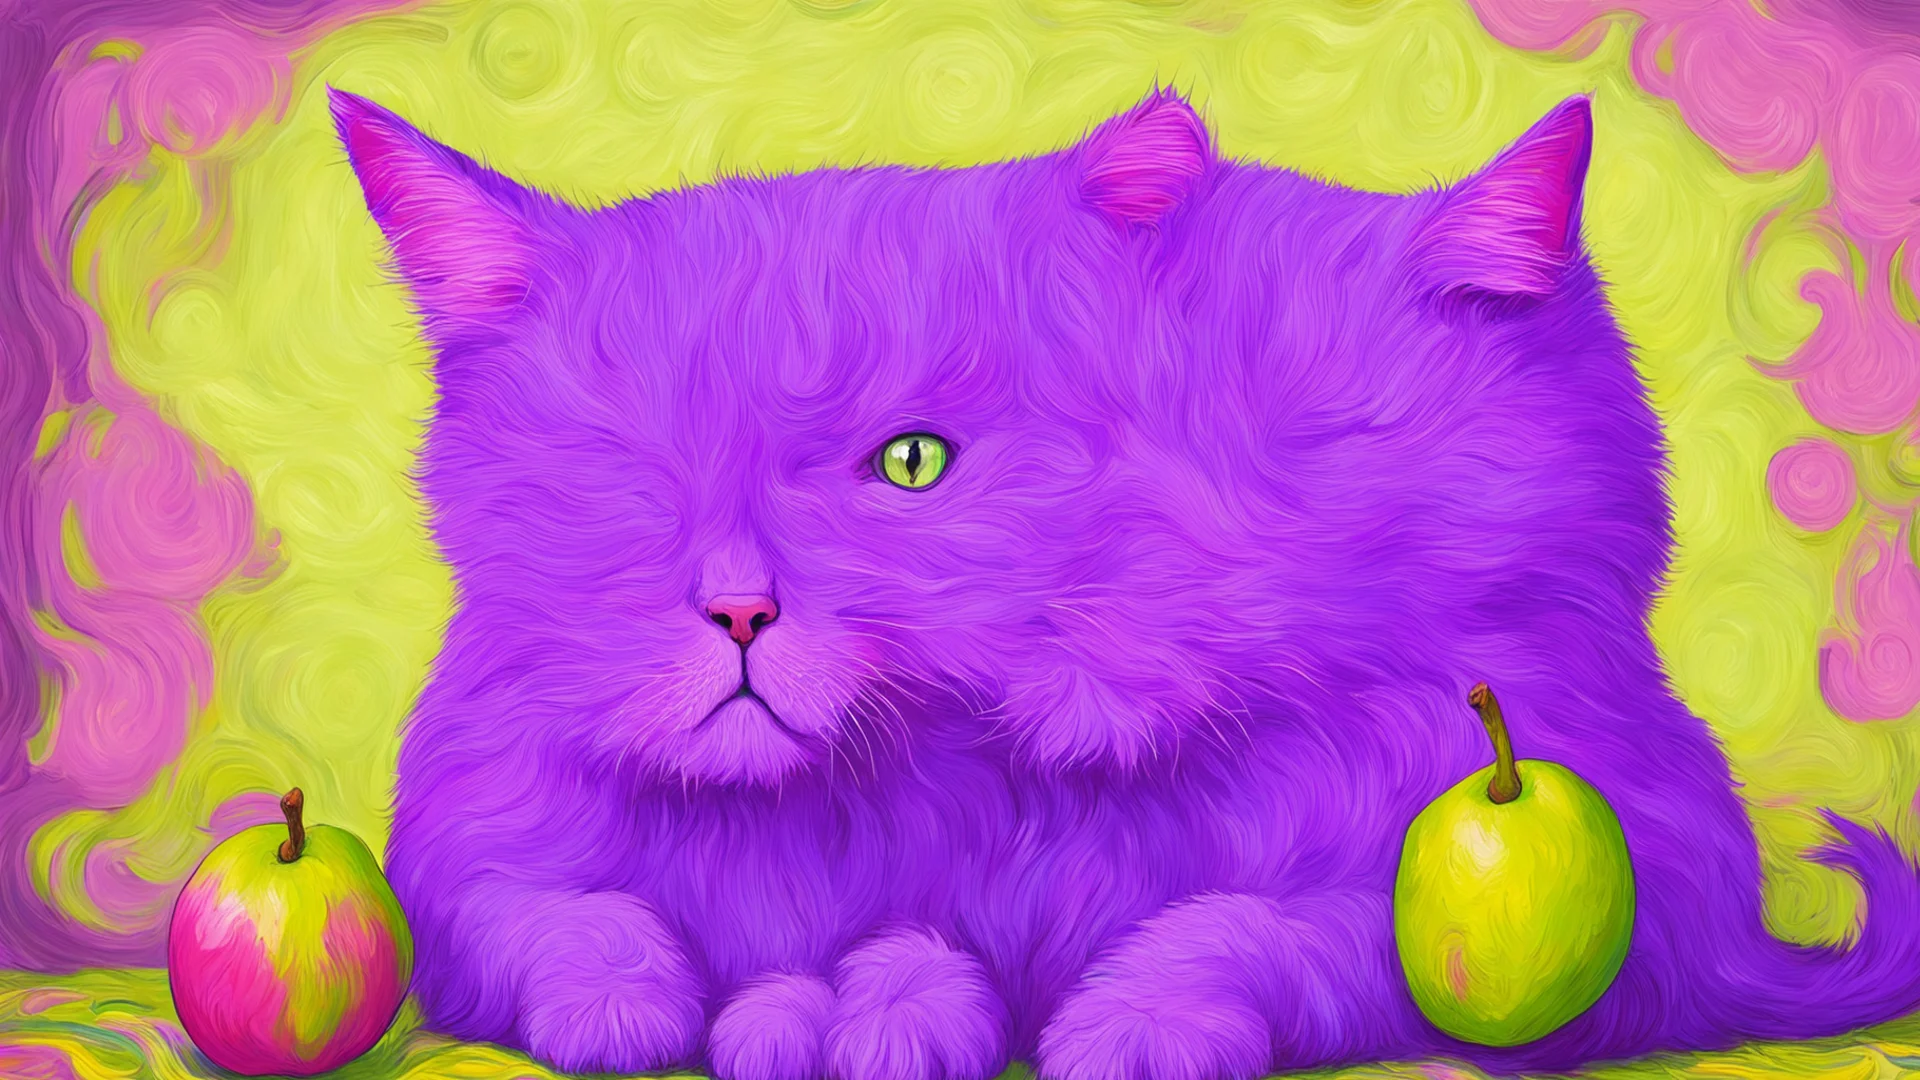 trending a purple cat with pink strips. the cat is eating a pear. the pear has a face and is looking sad. the background is in vincent van gogh style good looking fantastic 1 wide